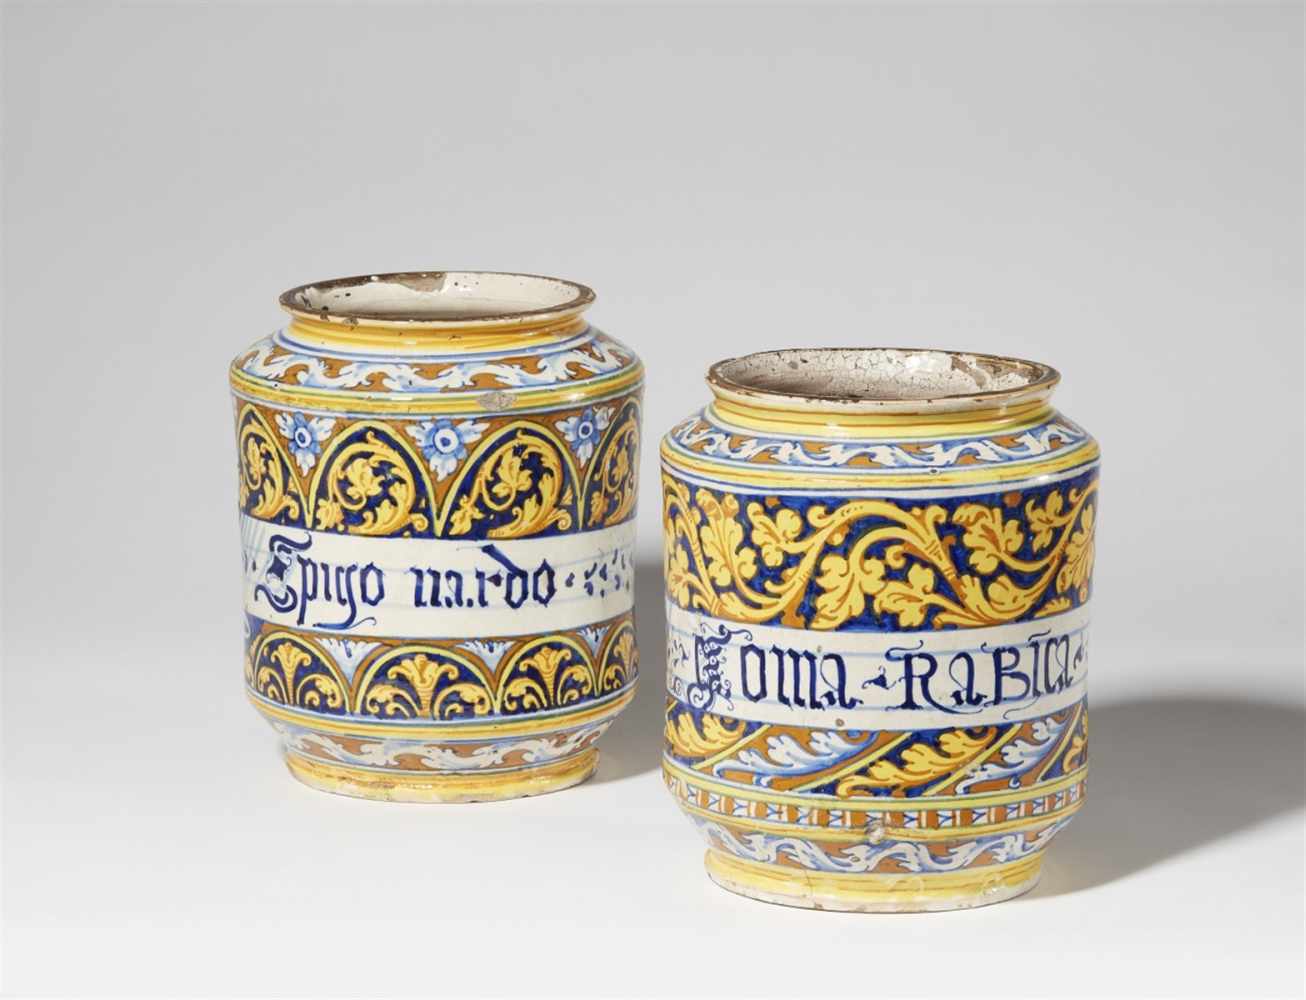 A pair of Italian majolica albarelliSquat cylindrical form with waisted neck, one inscribed "Goma